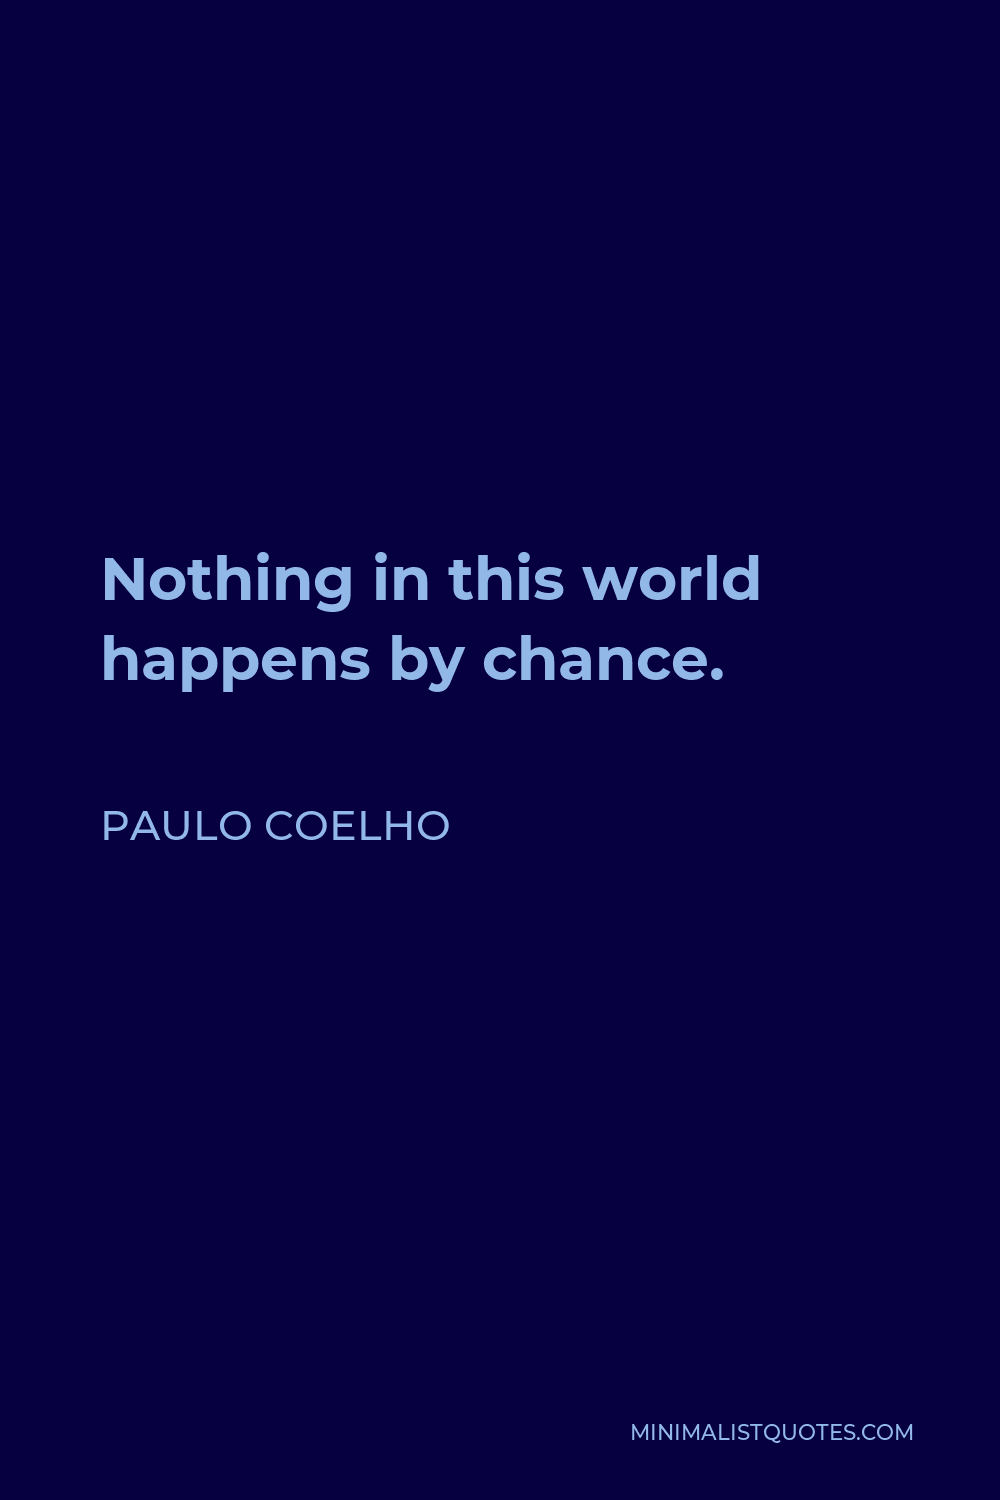 Paulo Coelho Quote - Nothing in this world happens by chance.